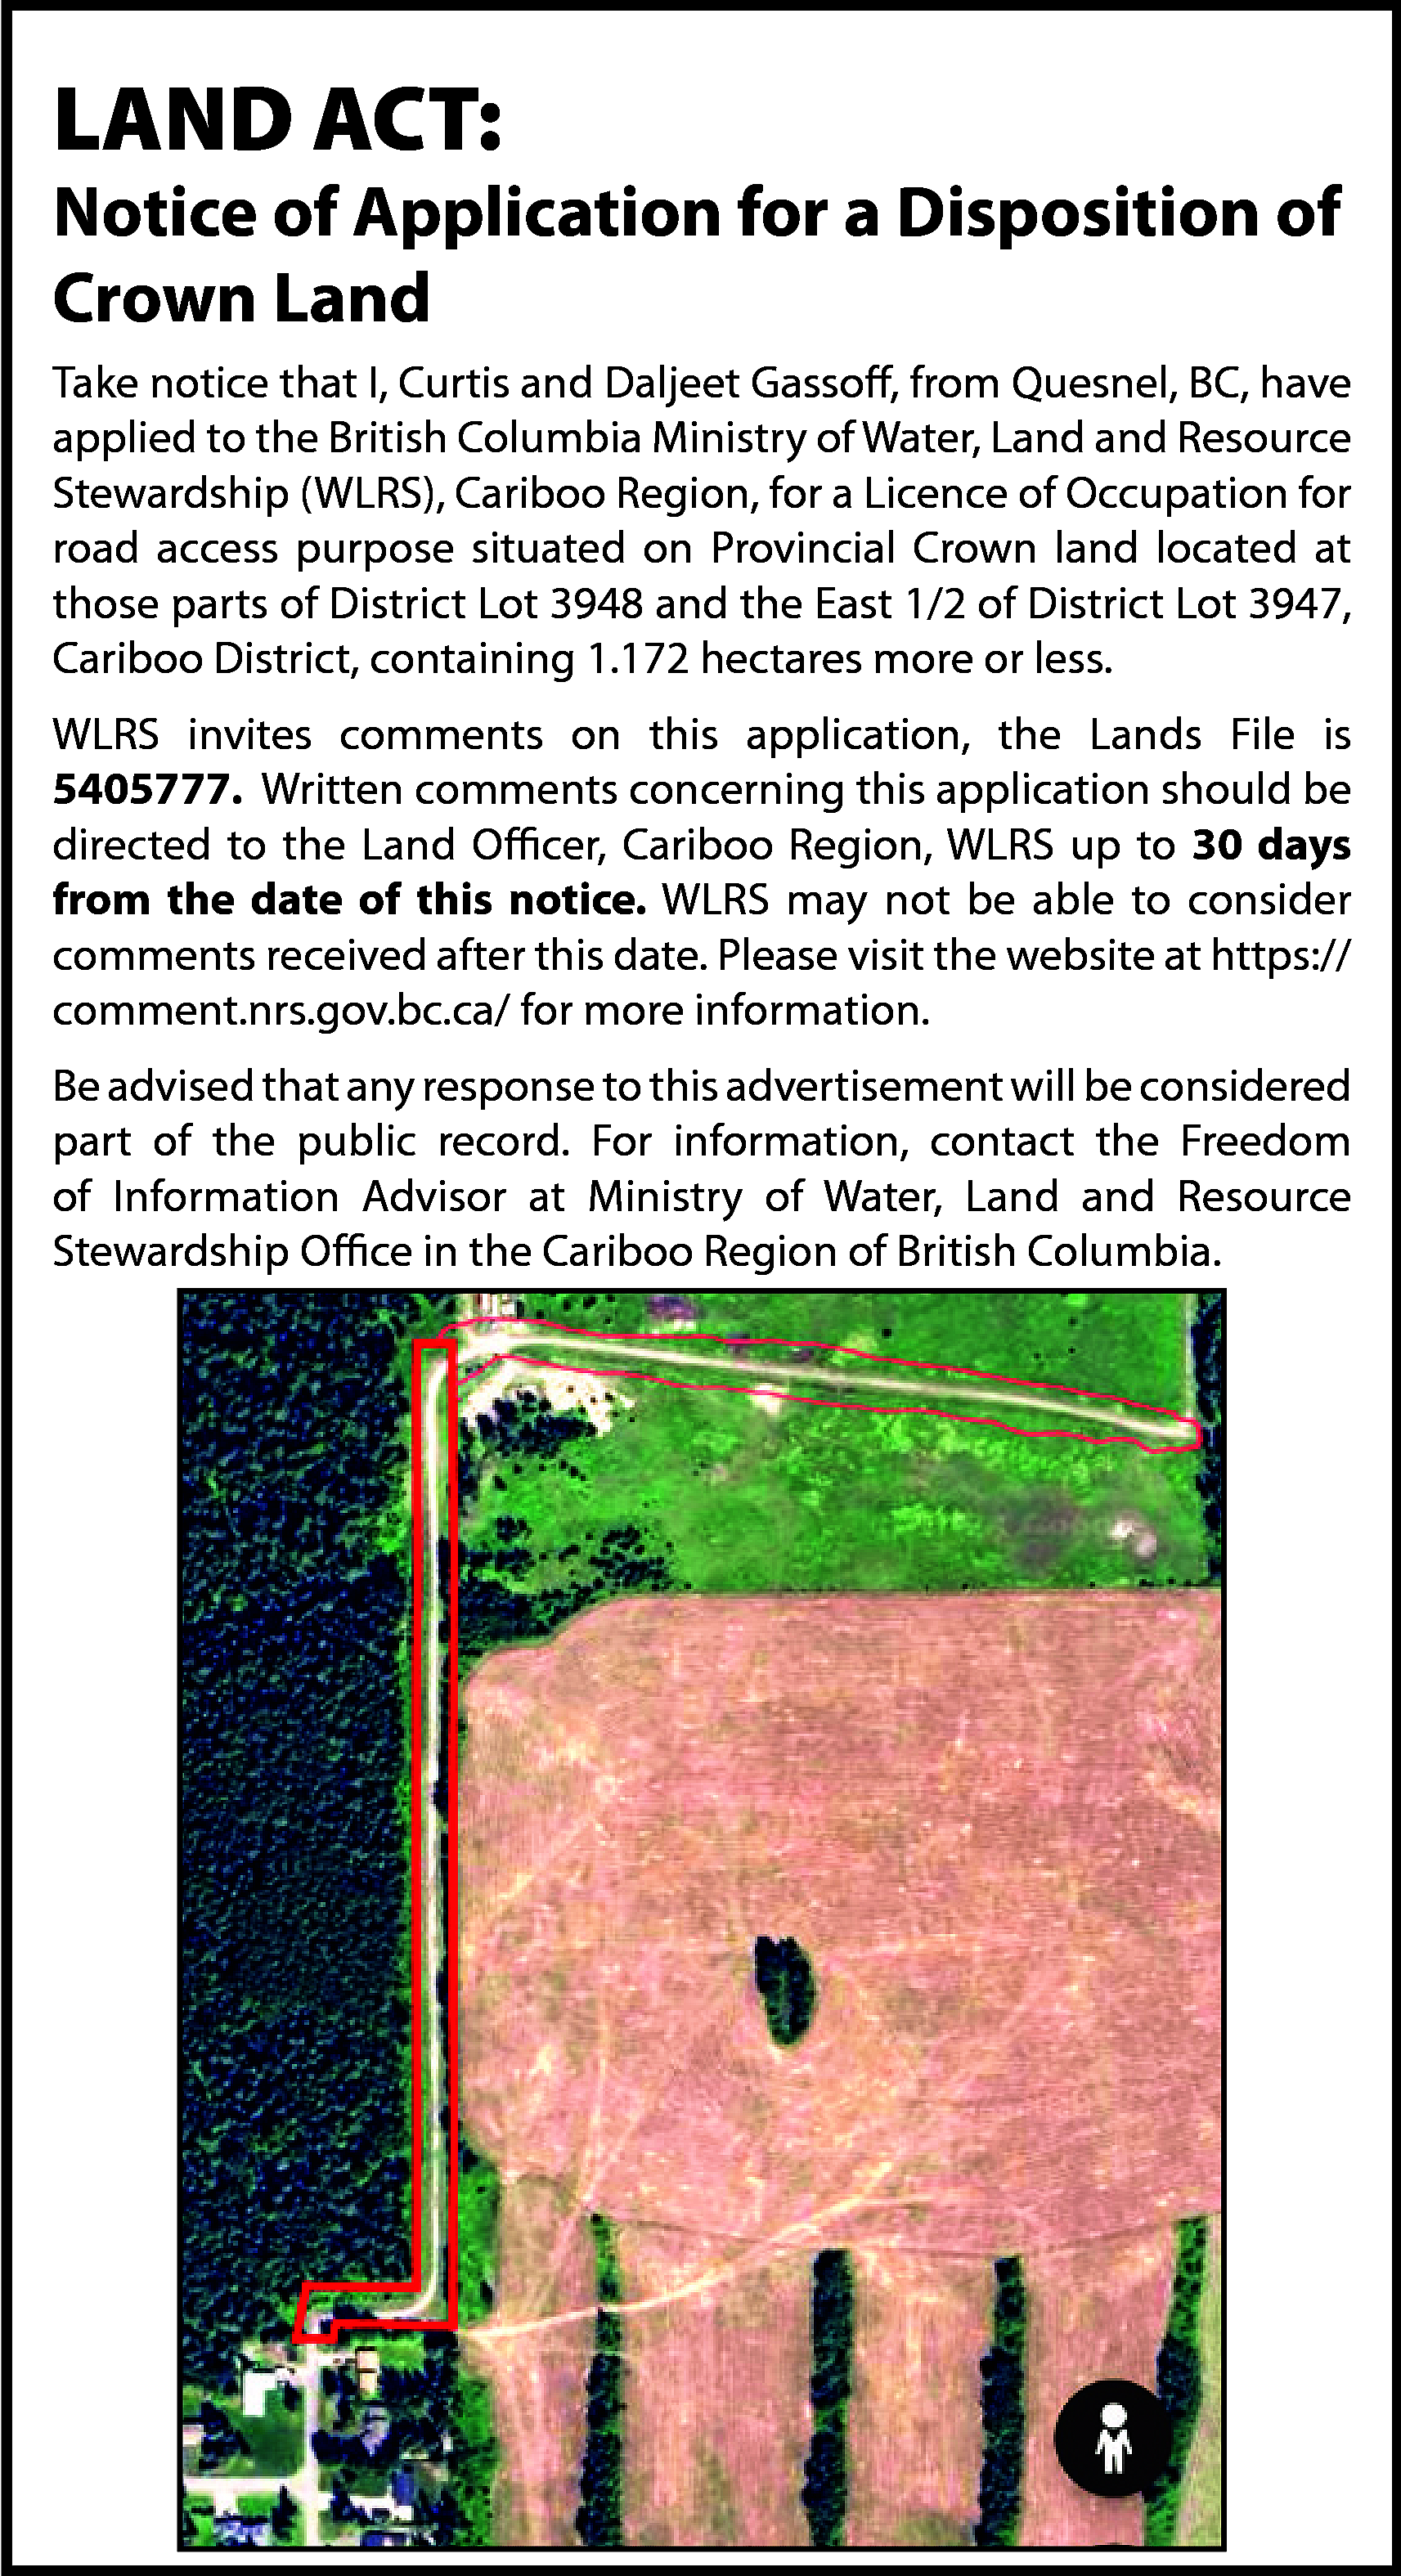 LAND ACT: <br> <br>Notice of  LAND ACT:    Notice of Application for a Disposition of  Crown Land  Take notice that I, Curtis and Daljeet Gassoff, from Quesnel, BC, have  applied to the British Columbia Ministry of Water, Land and Resource  Stewardship (WLRS), Cariboo Region, for a Licence of Occupation for  road access purpose situated on Provincial Crown land located at  those parts of District Lot 3948 and the East 1/2 of District Lot 3947,  Cariboo District, containing 1.172 hectares more or less.  WLRS invites comments on this application, the Lands File is  5405777. Written comments concerning this application should be  directed to the Land Officer, Cariboo Region, WLRS up to 30 days  from the date of this notice. WLRS may not be able to consider  comments received after this date. Please visit the website at https://  comment.nrs.gov.bc.ca/ for more information.  Be advised that any response to this advertisement will be considered  part of the public record. For information, contact the Freedom  of Information Advisor at Ministry of Water, Land and Resource  Stewardship Office in the Cariboo Region of British Columbia.    